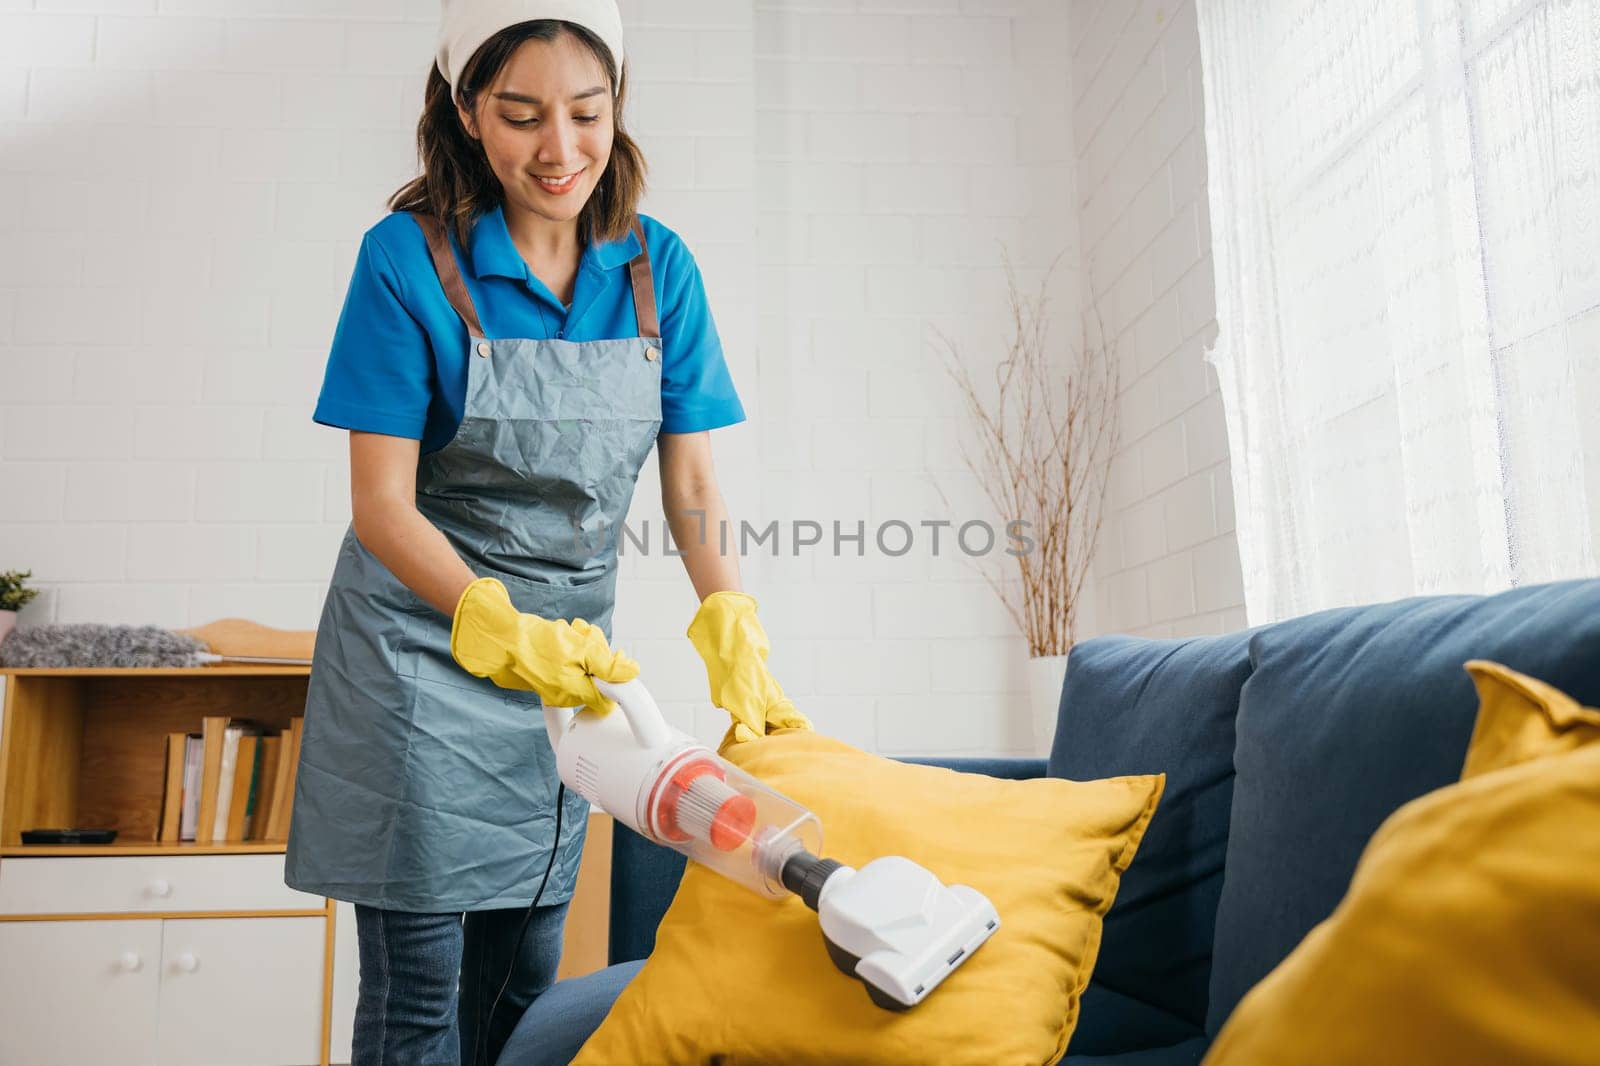 Focused on housework an Asian woman maid cheerfully vacuum machine cleaners a sofa in a living room. Her dedication to hygiene and furniture care reflects modern cleaning approaches.